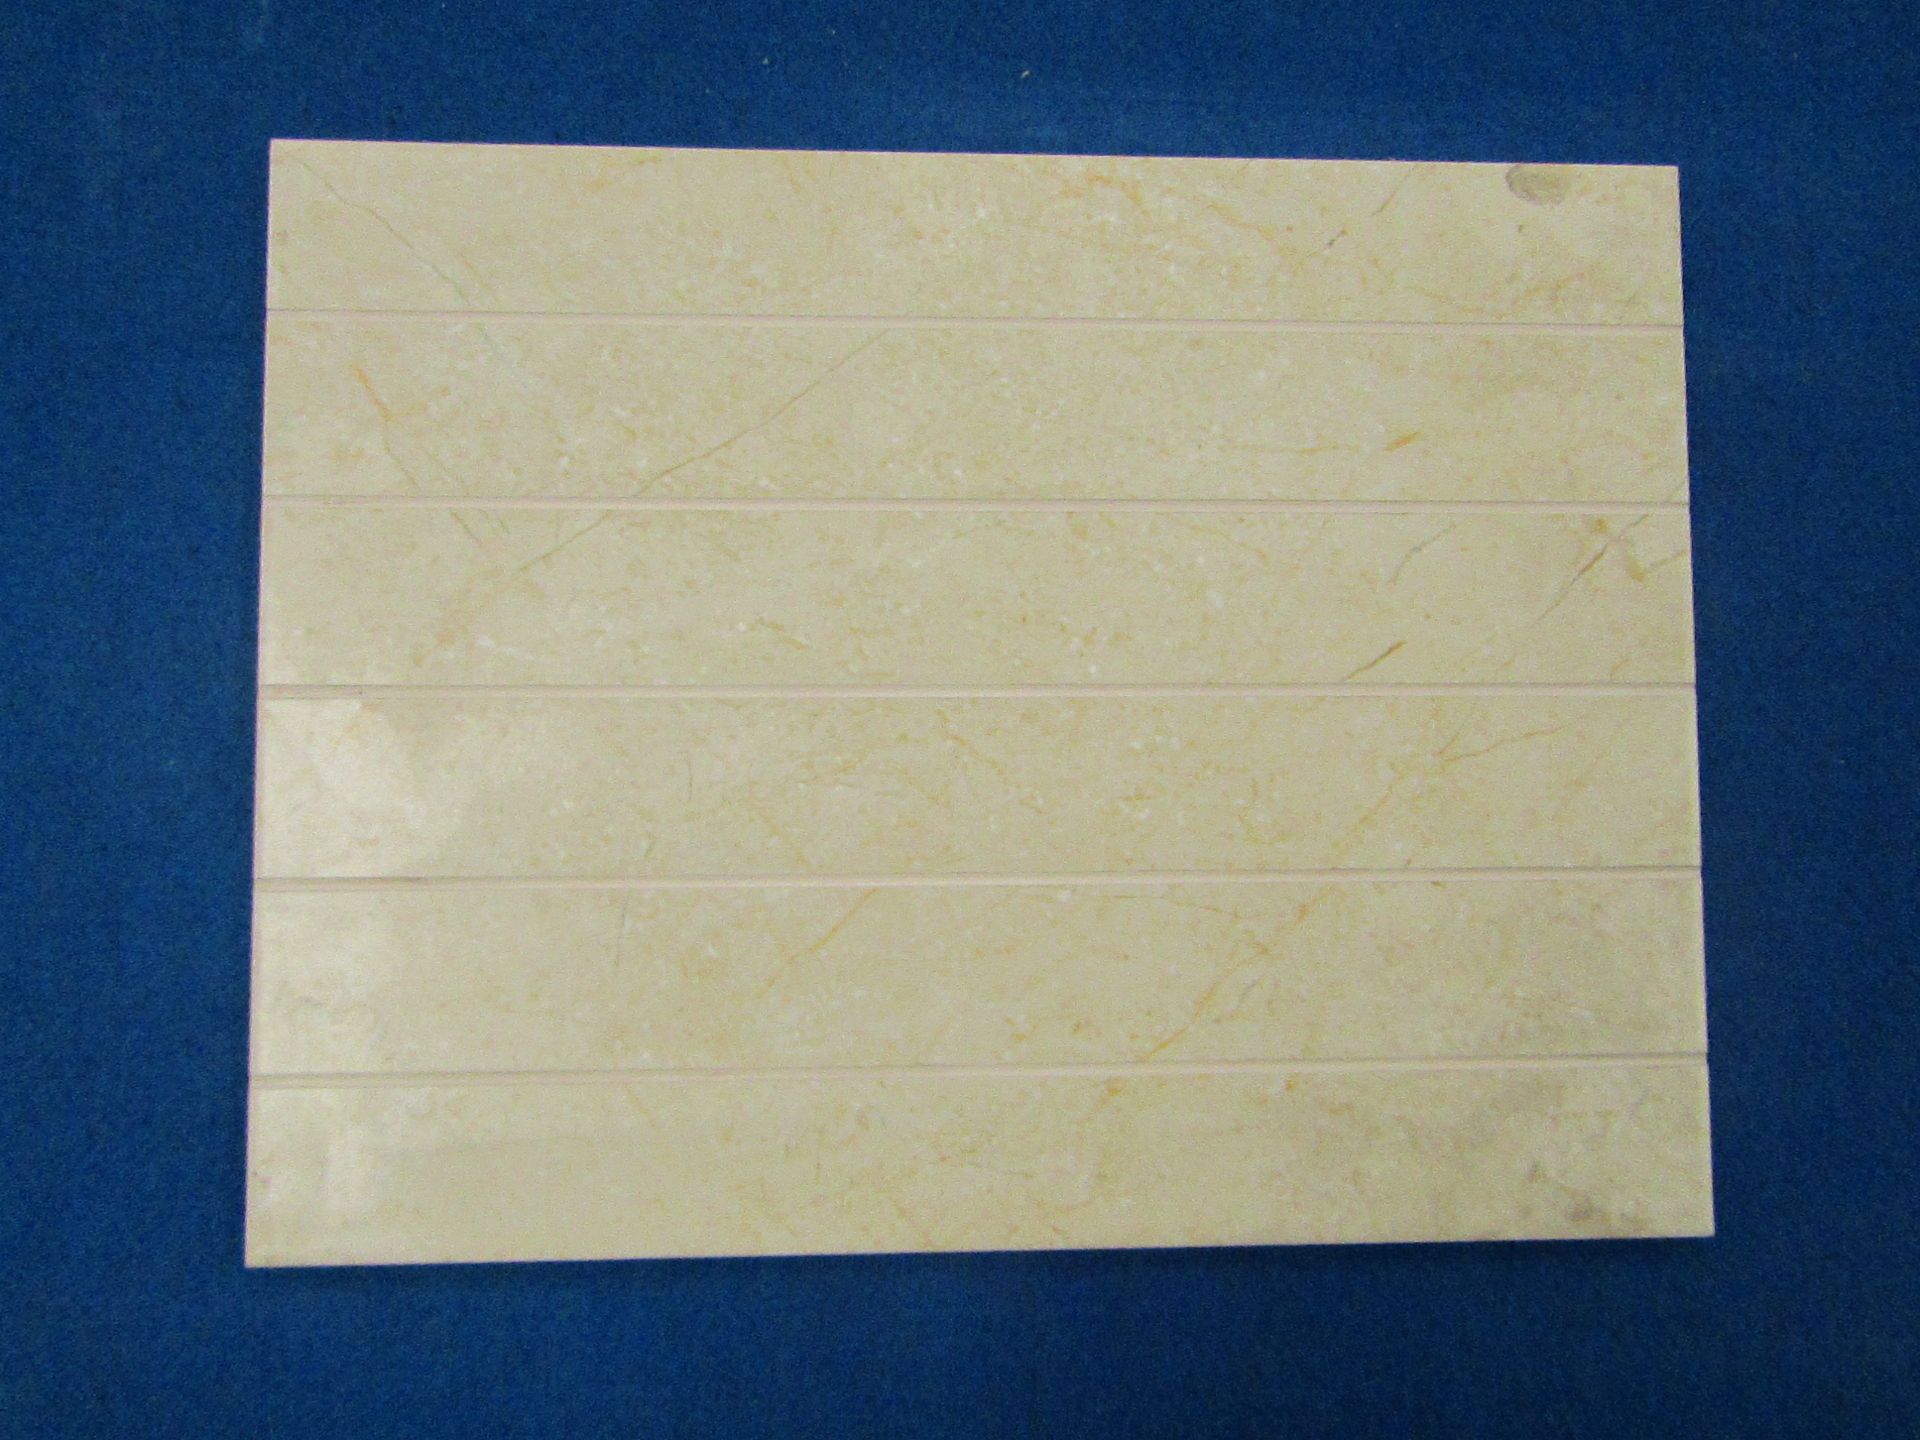 A Pallet containing 24 Packs of 10, Wickes 360x275 Crema Marfil satin Scored wall tiles, RRP £16.